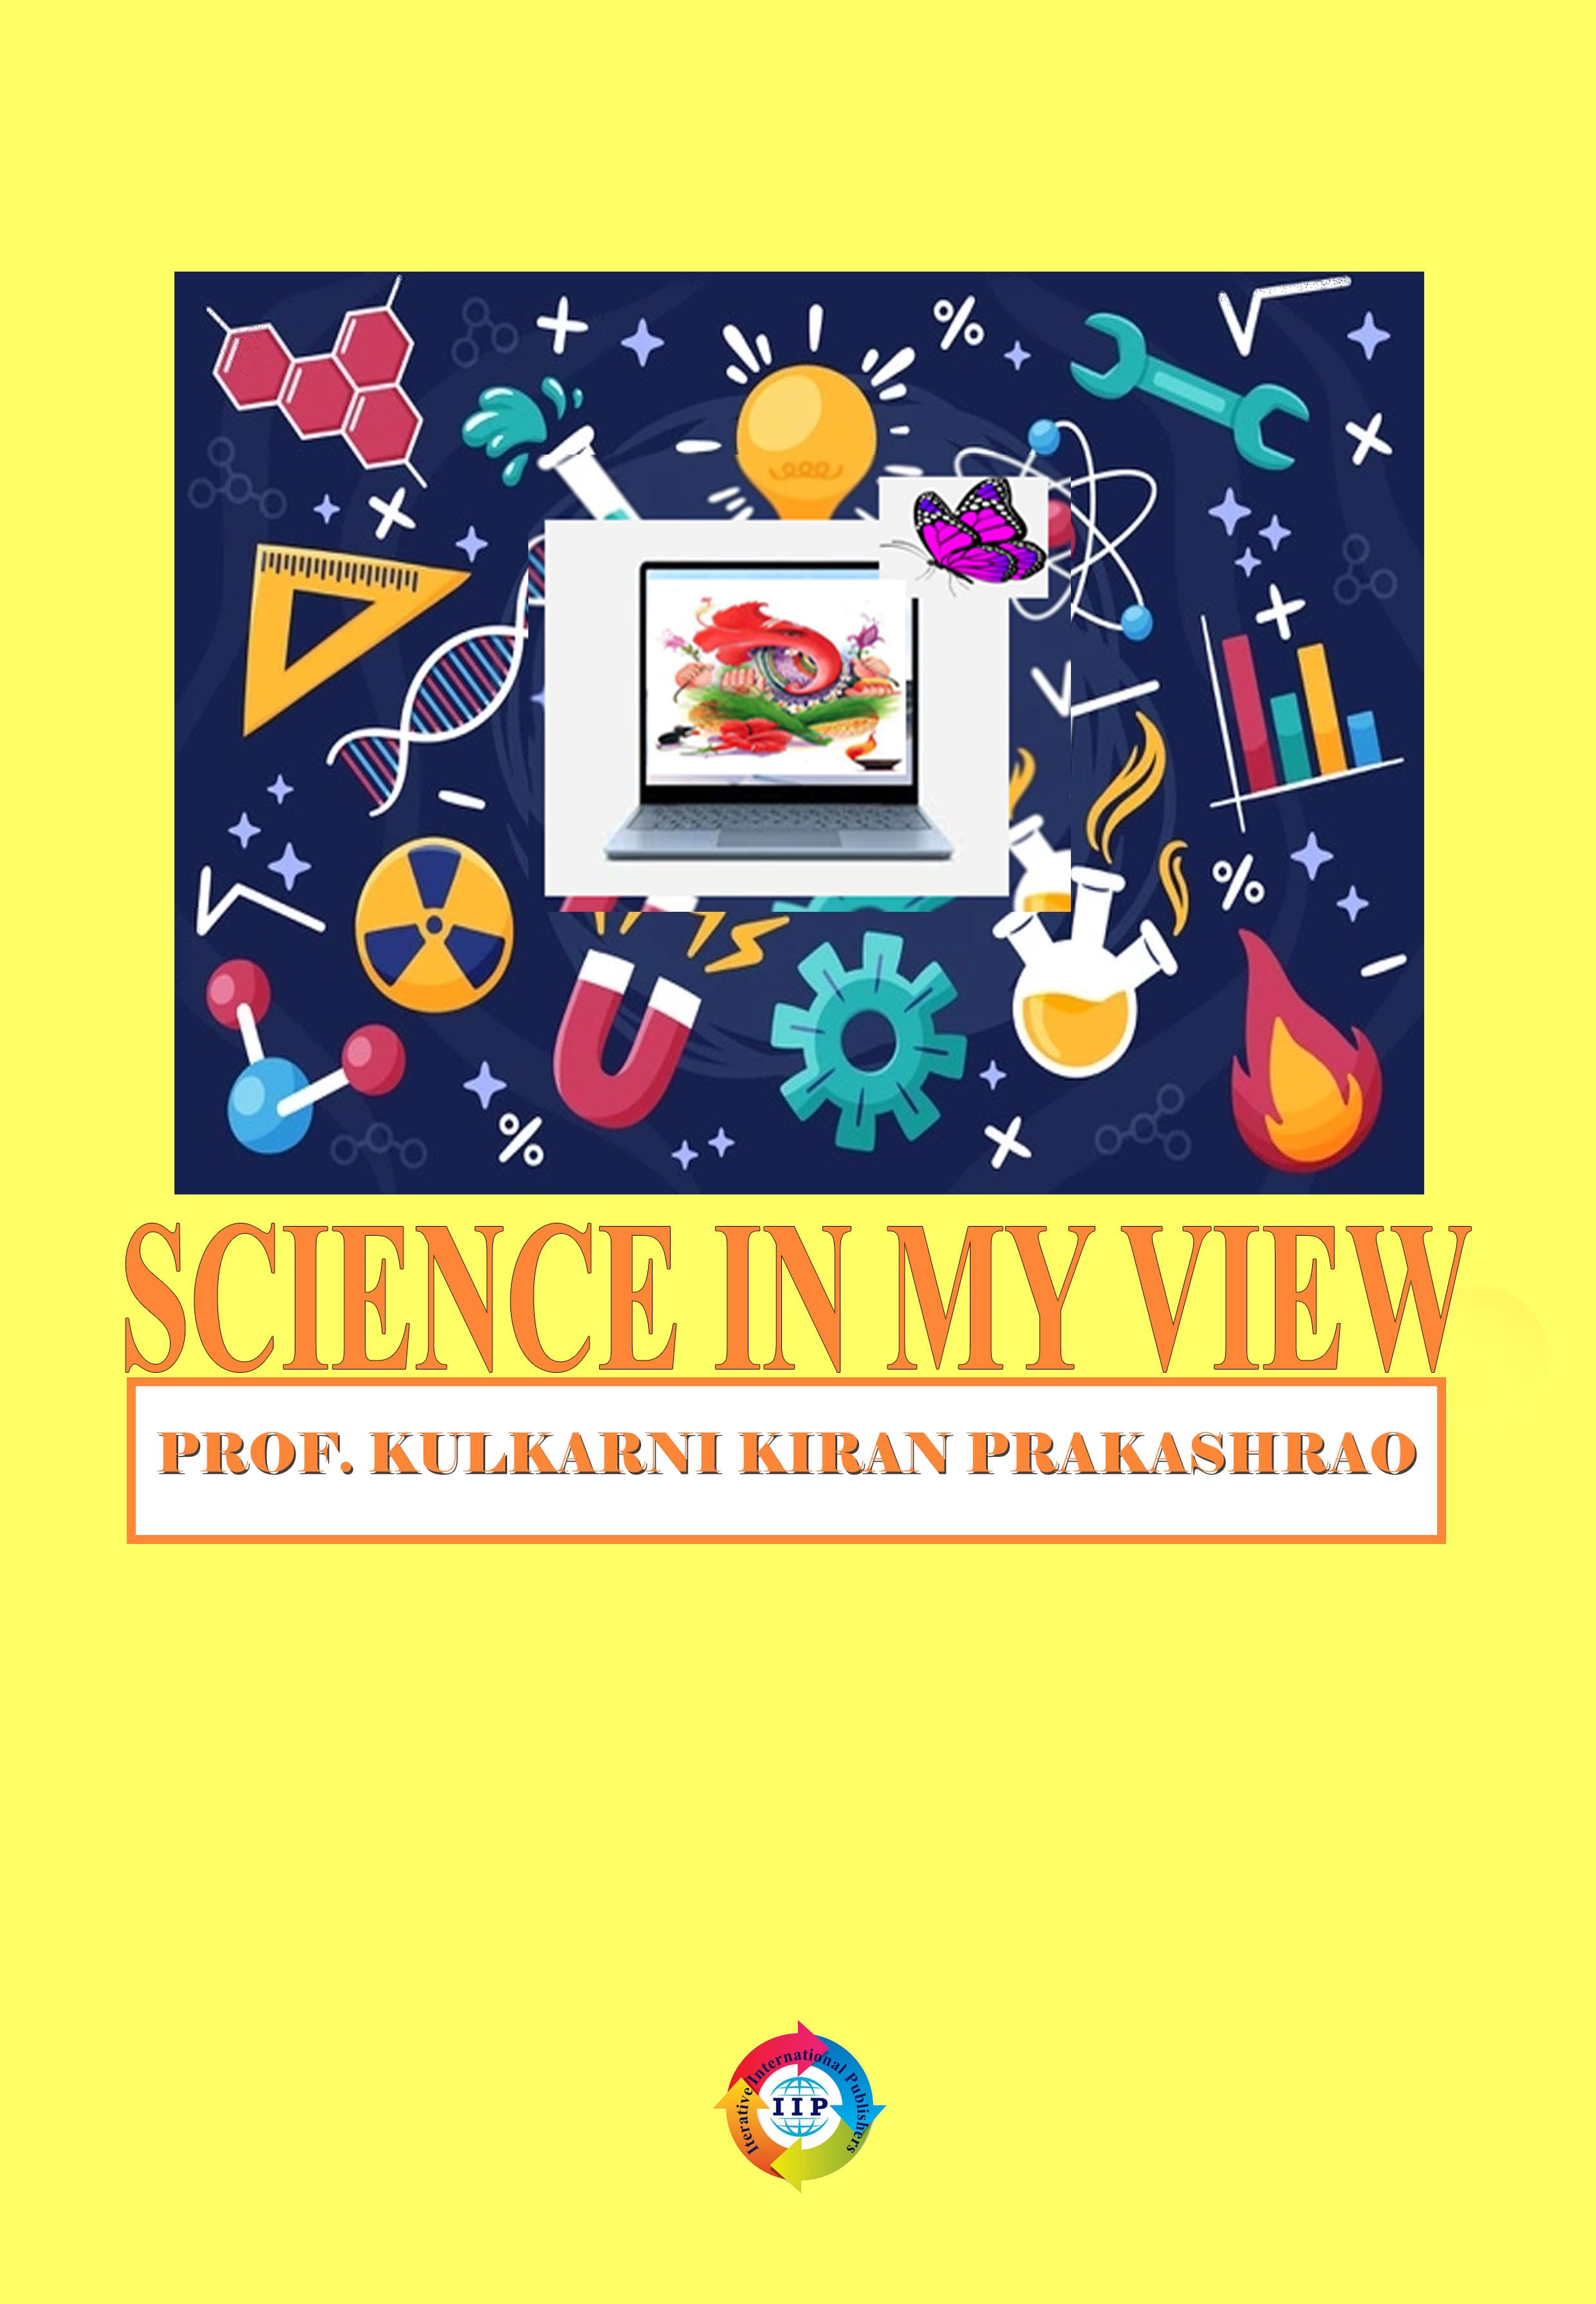 SCIENCE IN MY VIEW